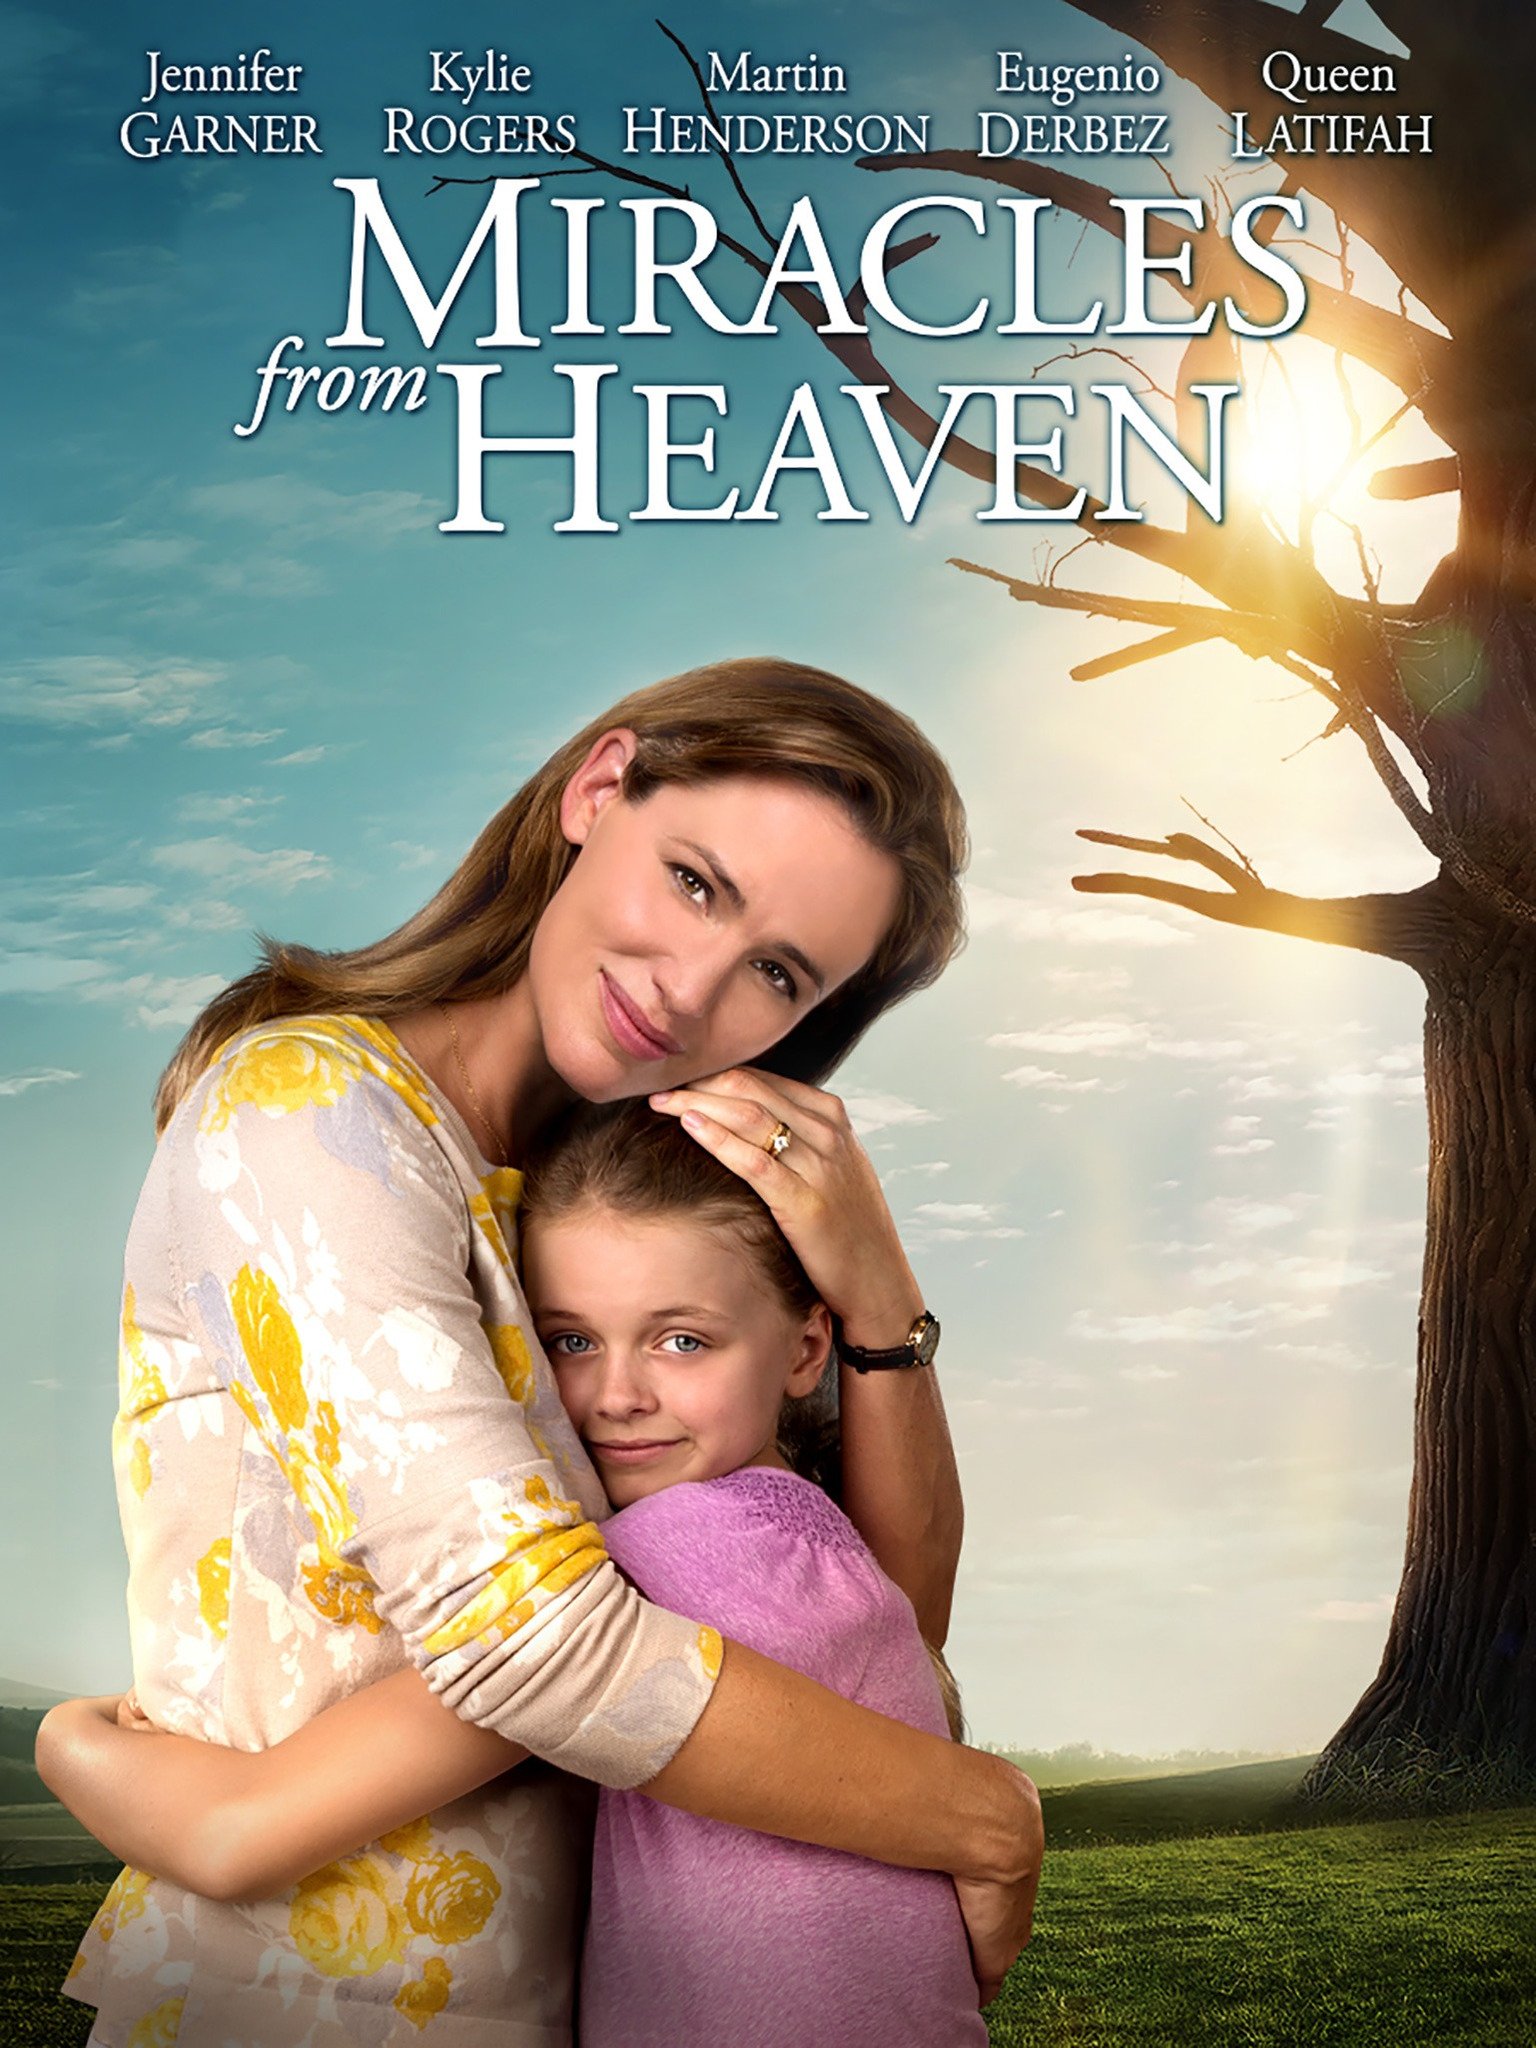 Miracles From Heaven International Trailer 1 Trailers & Videos